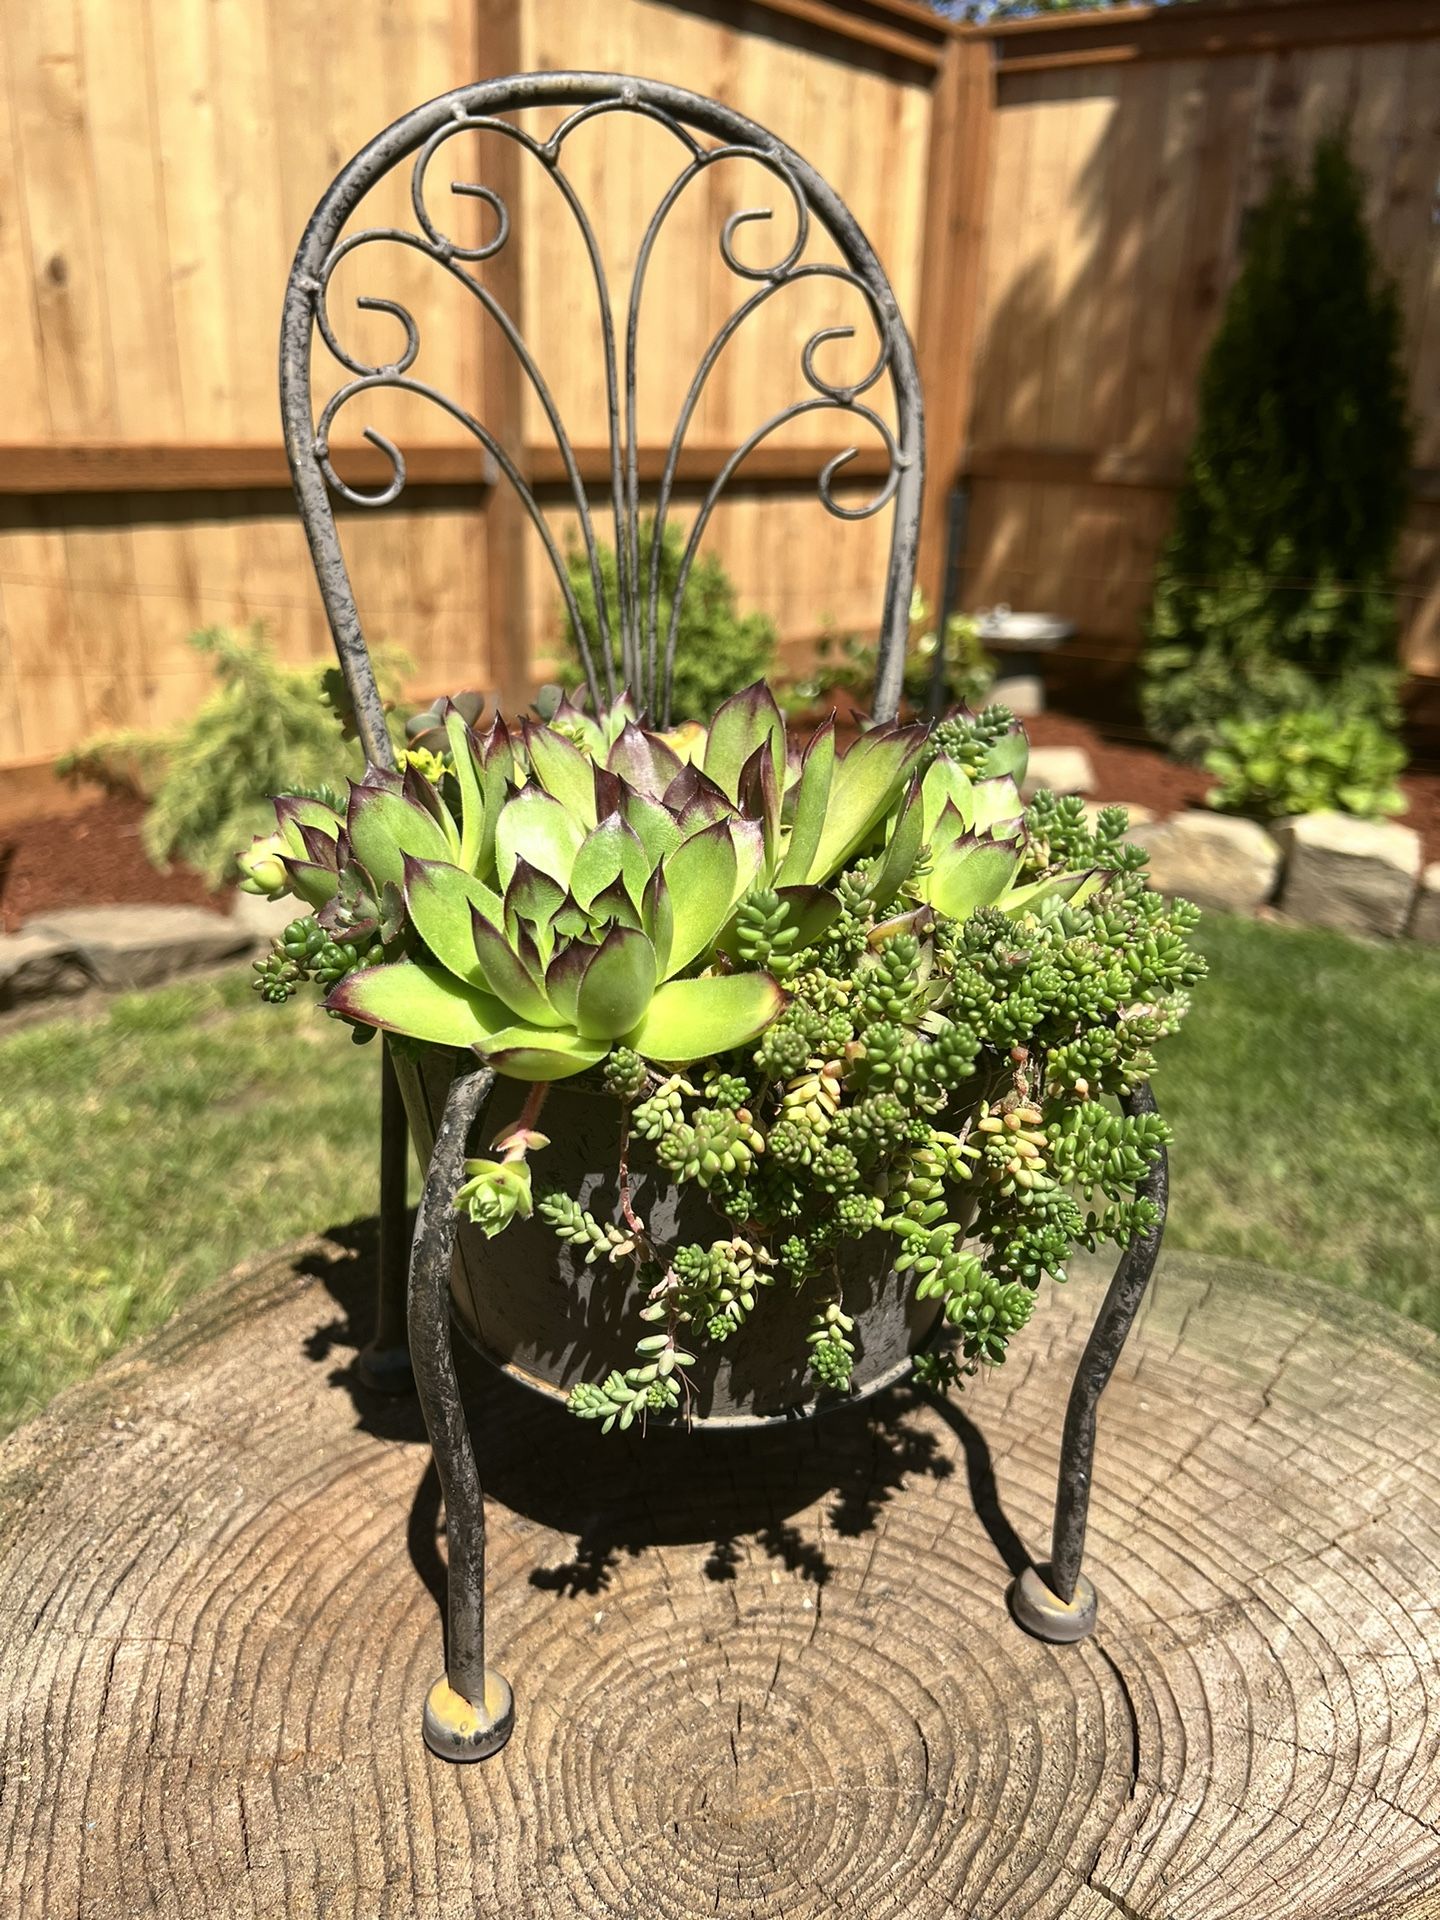 Cute Metal Chair flowing with Succulents